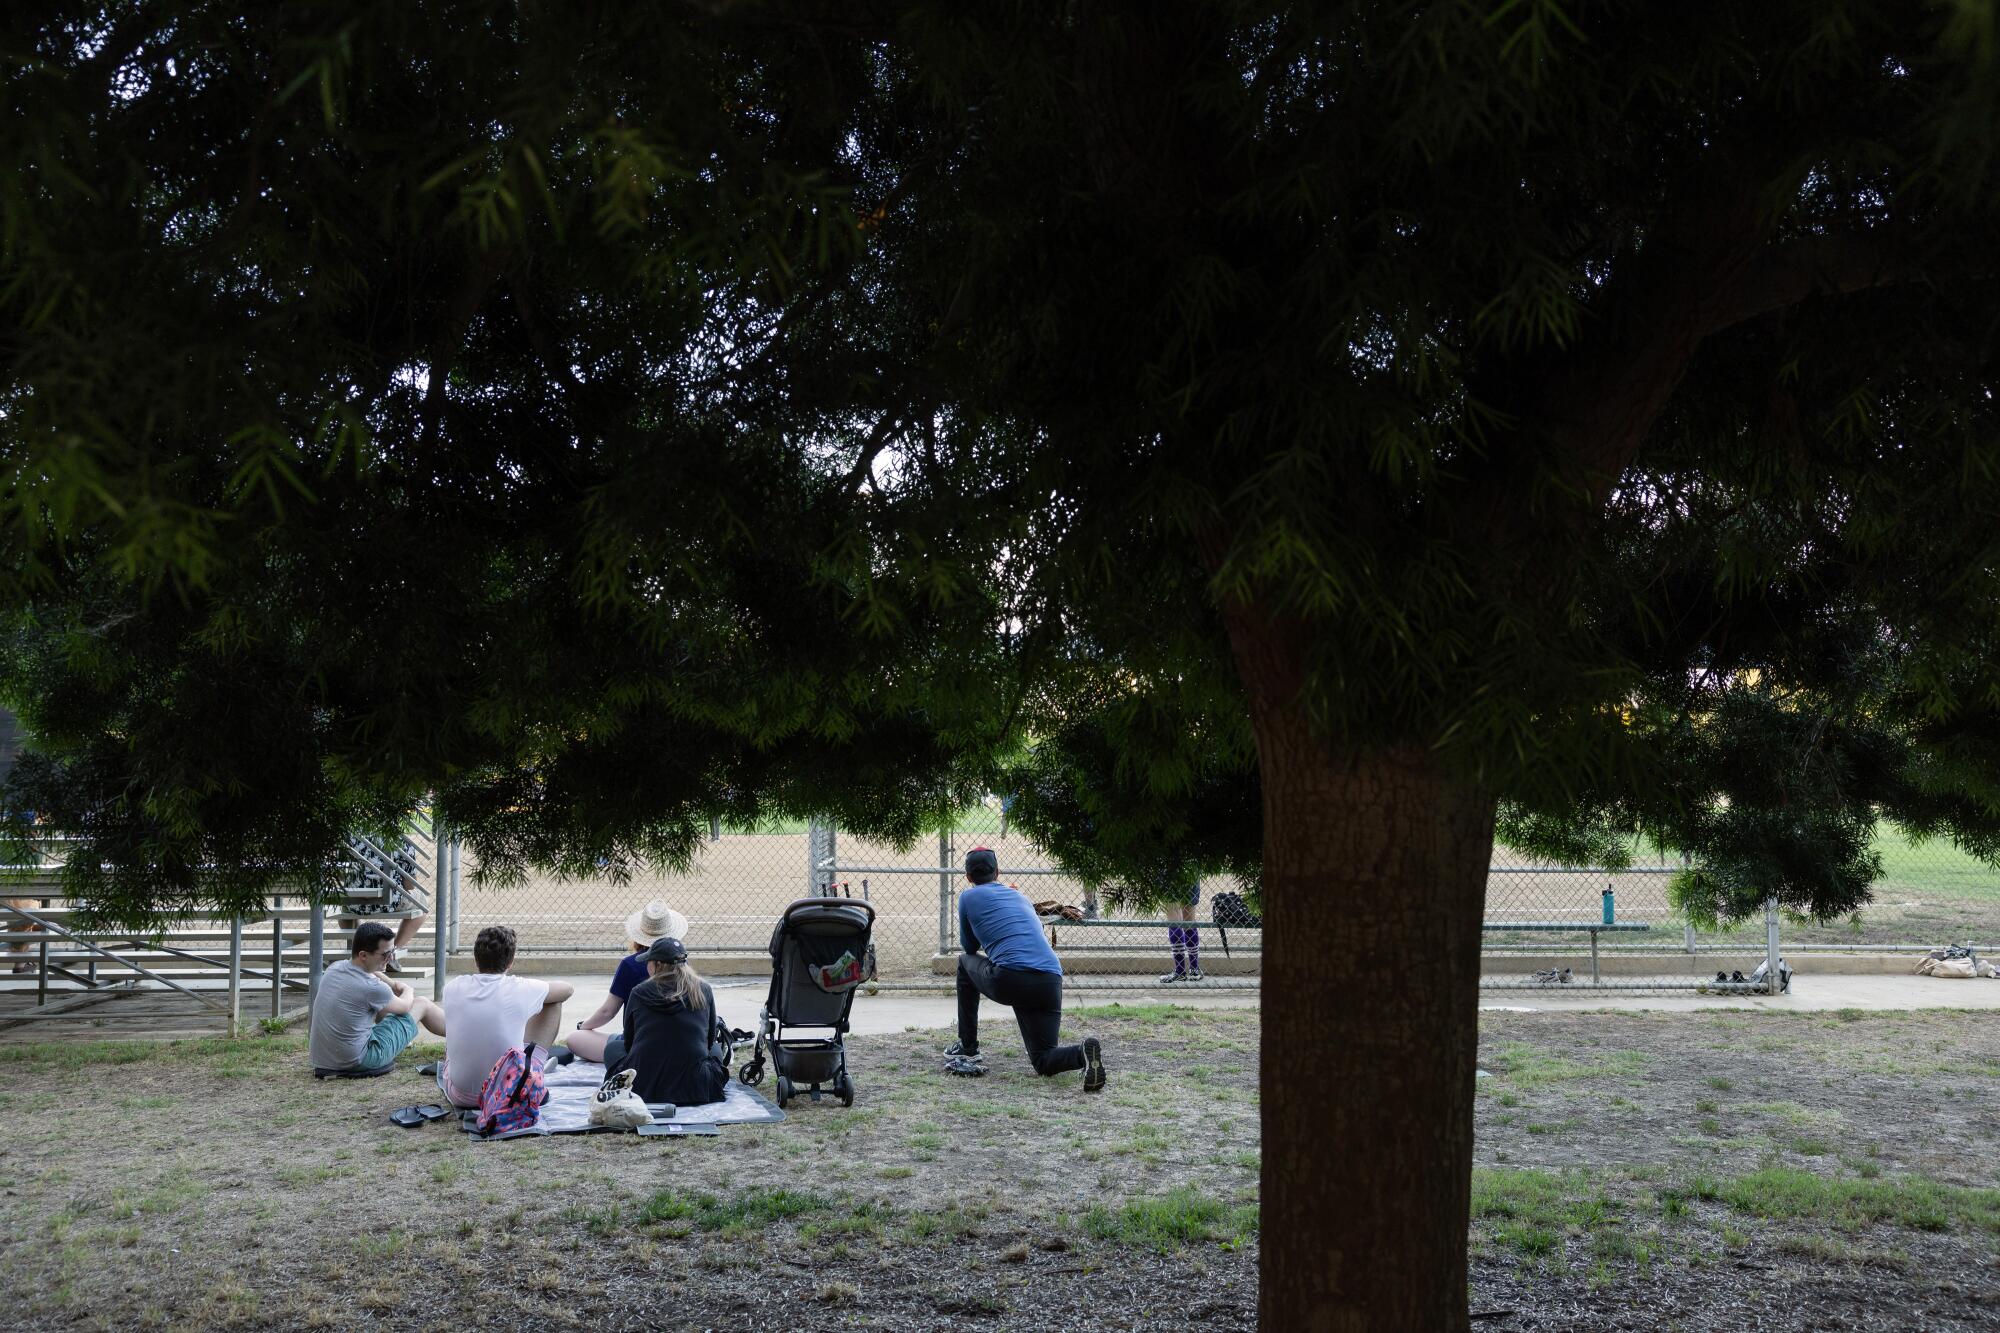 People sit on the ground behind a tree.